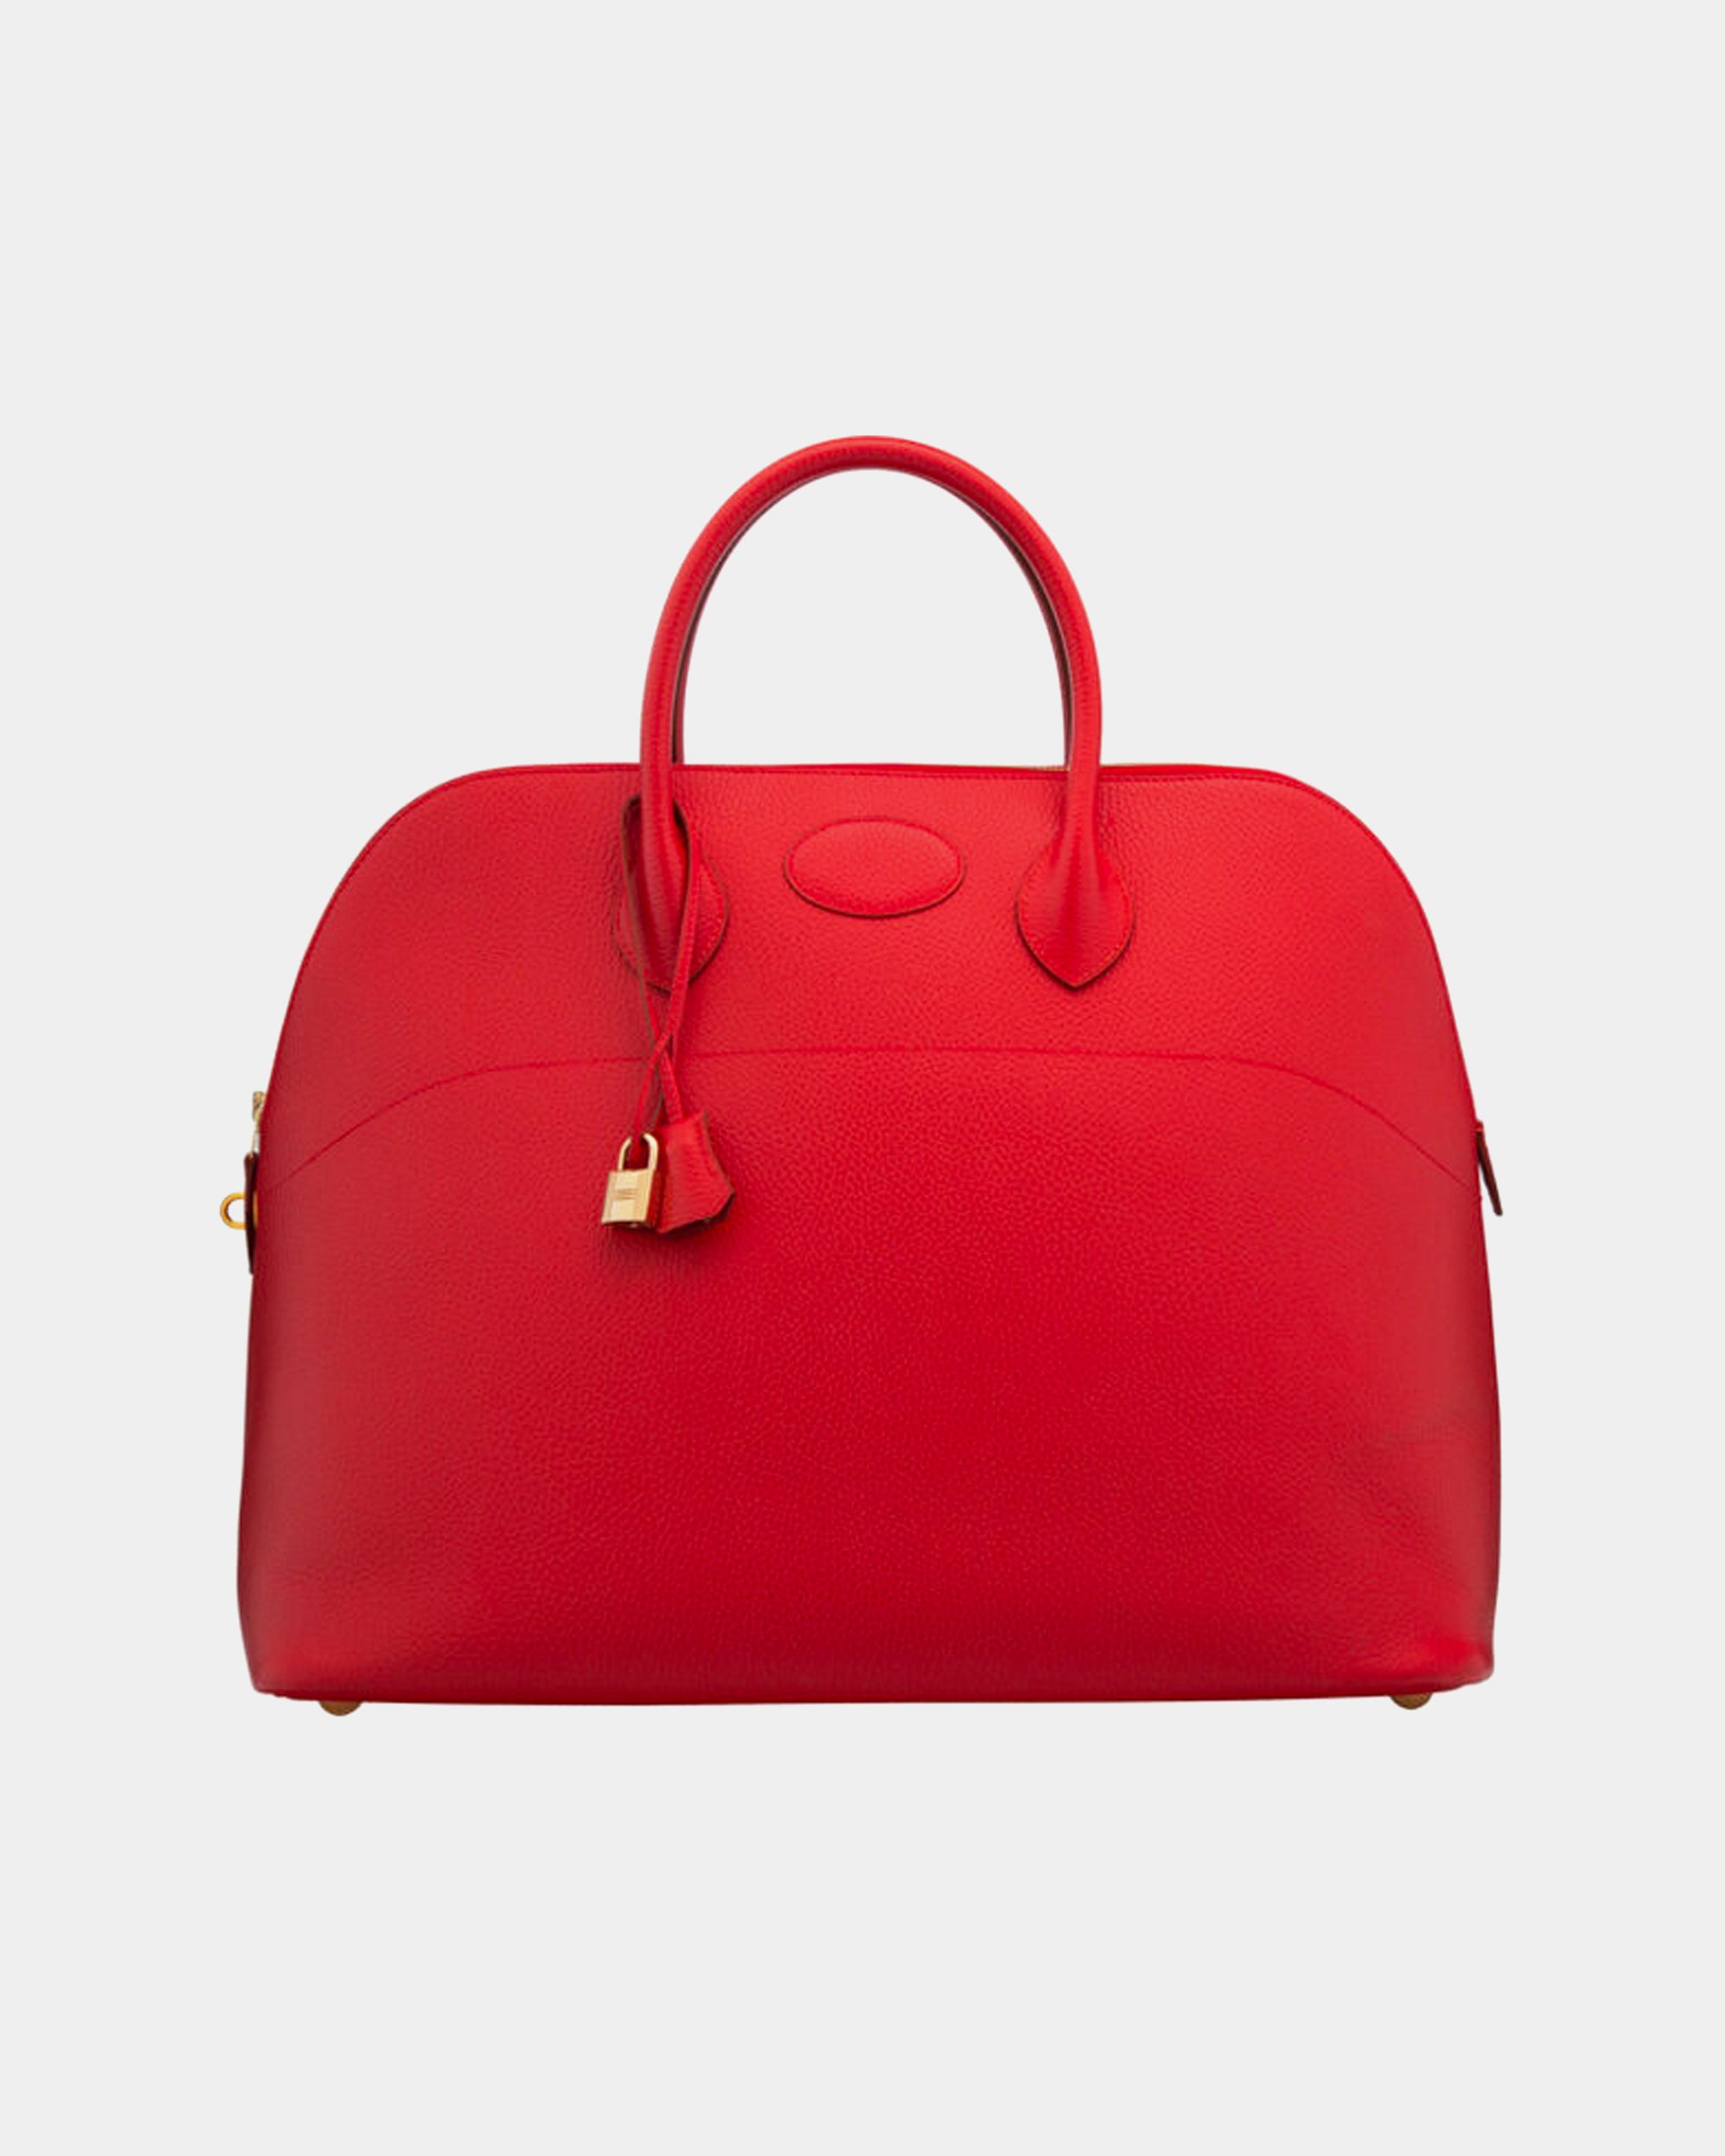 Vintage Hermes Bolide 45 in Red Ardennes Leather from 1998